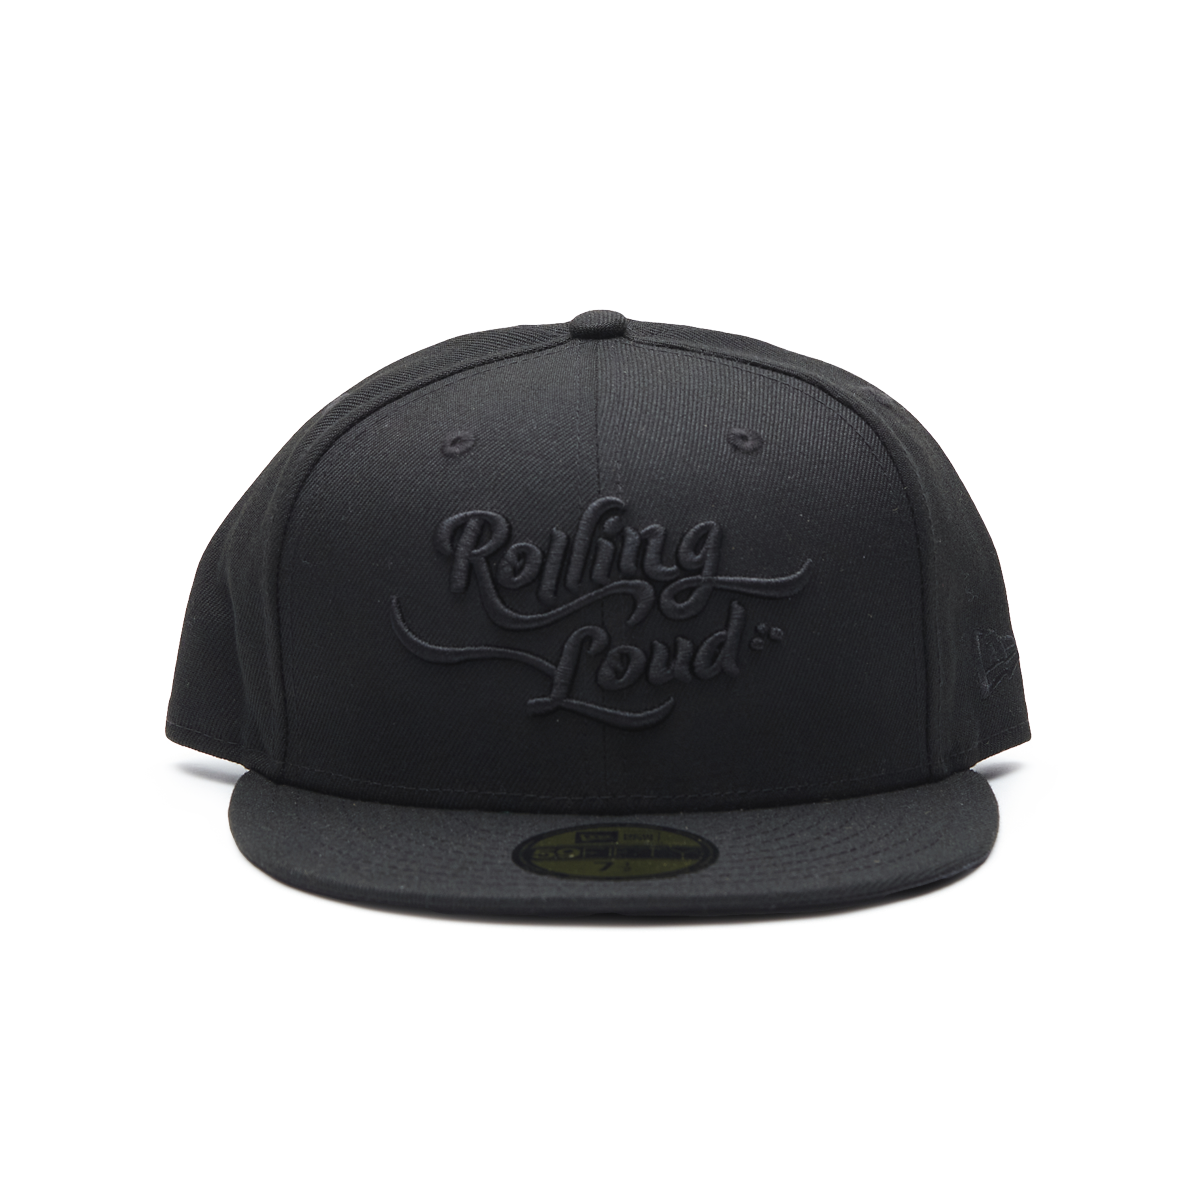 Rolling Loud Miami Black New Era Hat Fitted